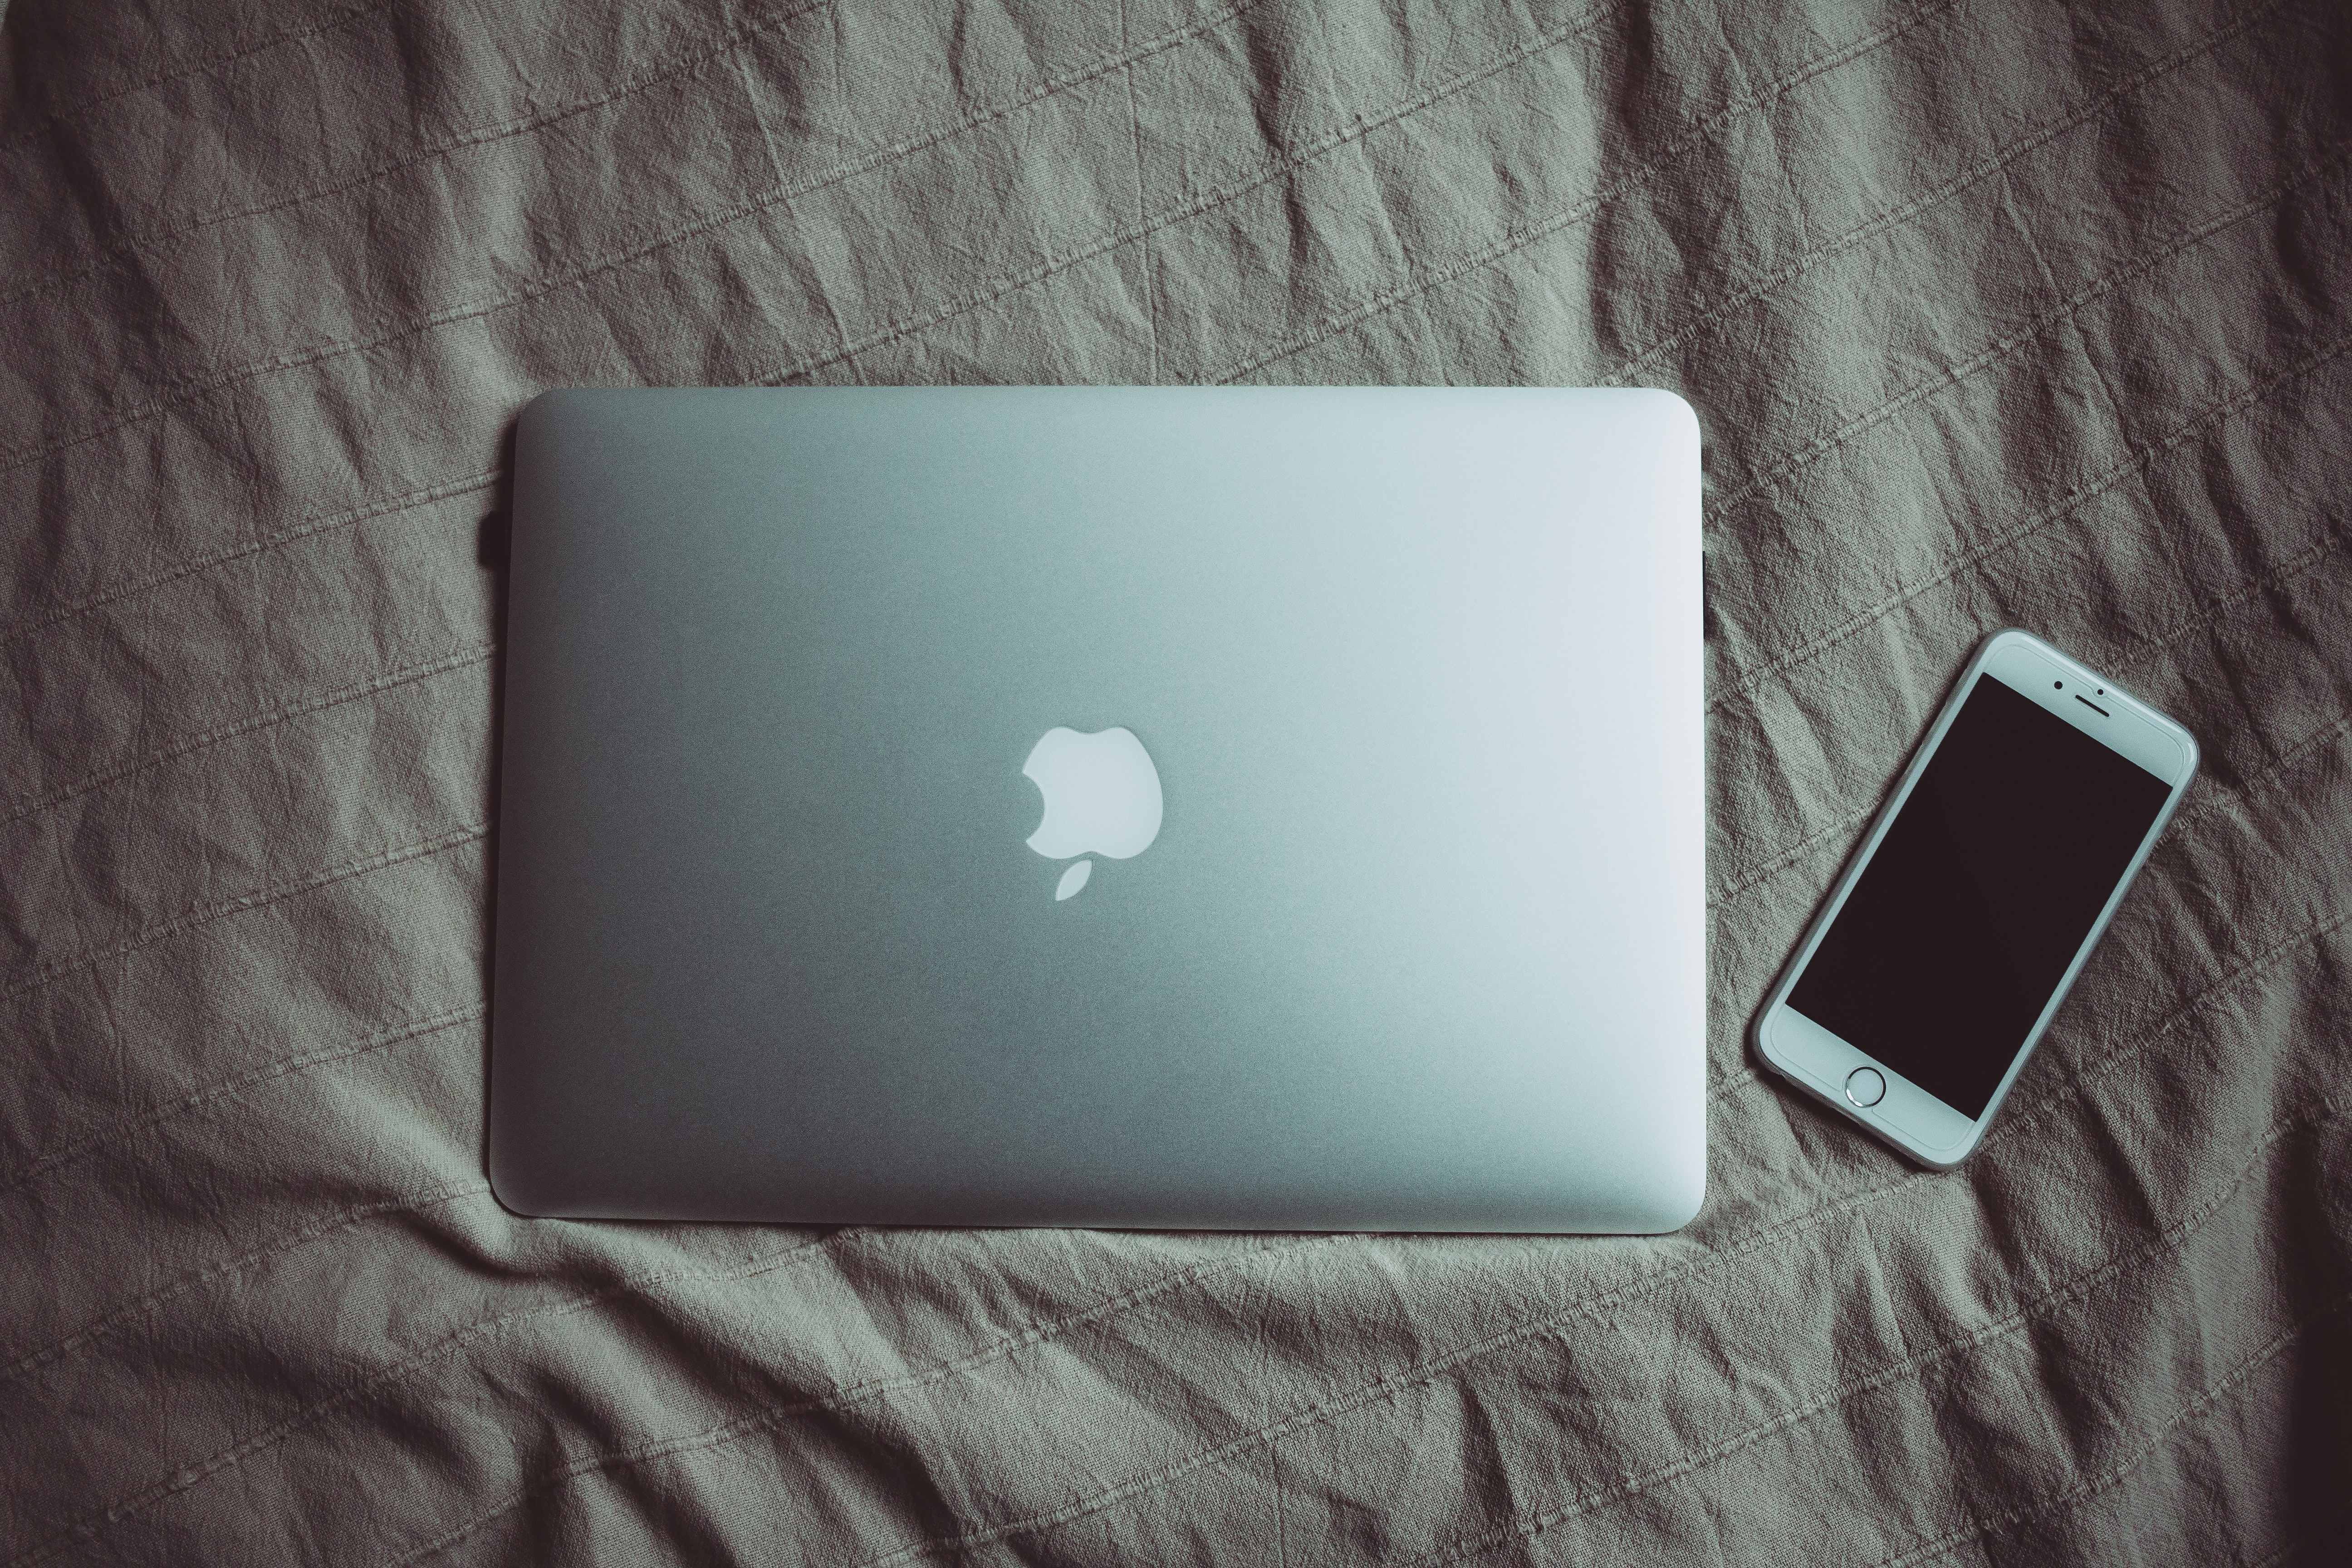 Silver Macbook Beside Silver Iphone 6, Apple, Bed, Cellphone, Close -up, HQ Photo